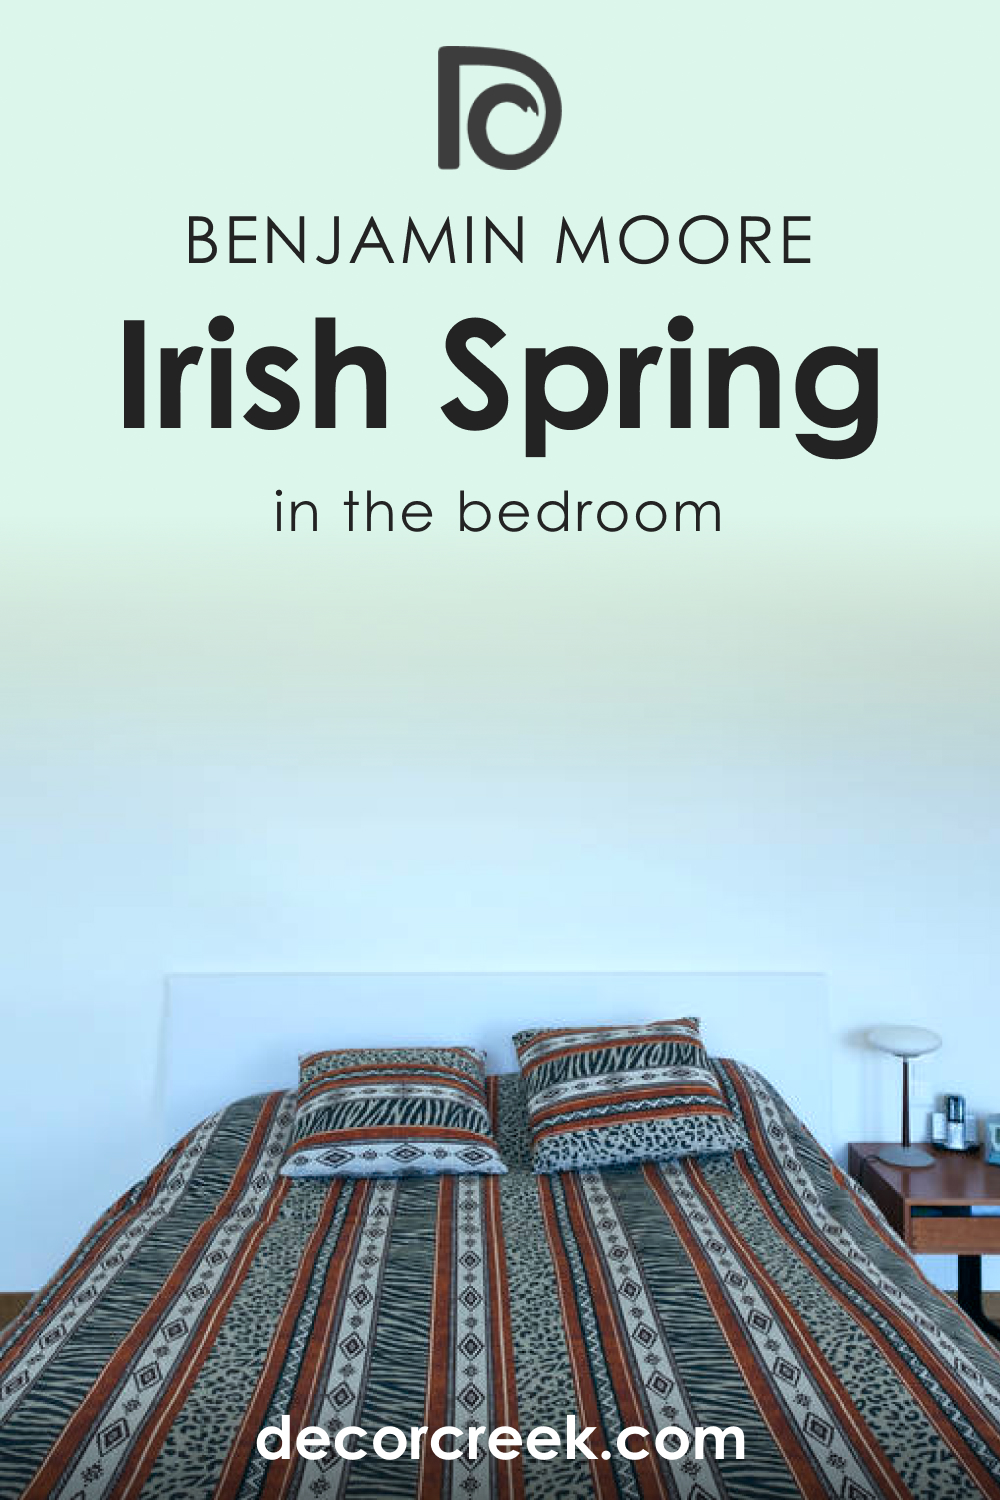 How to Use Irish Spring 2038-70 in the Bedroom